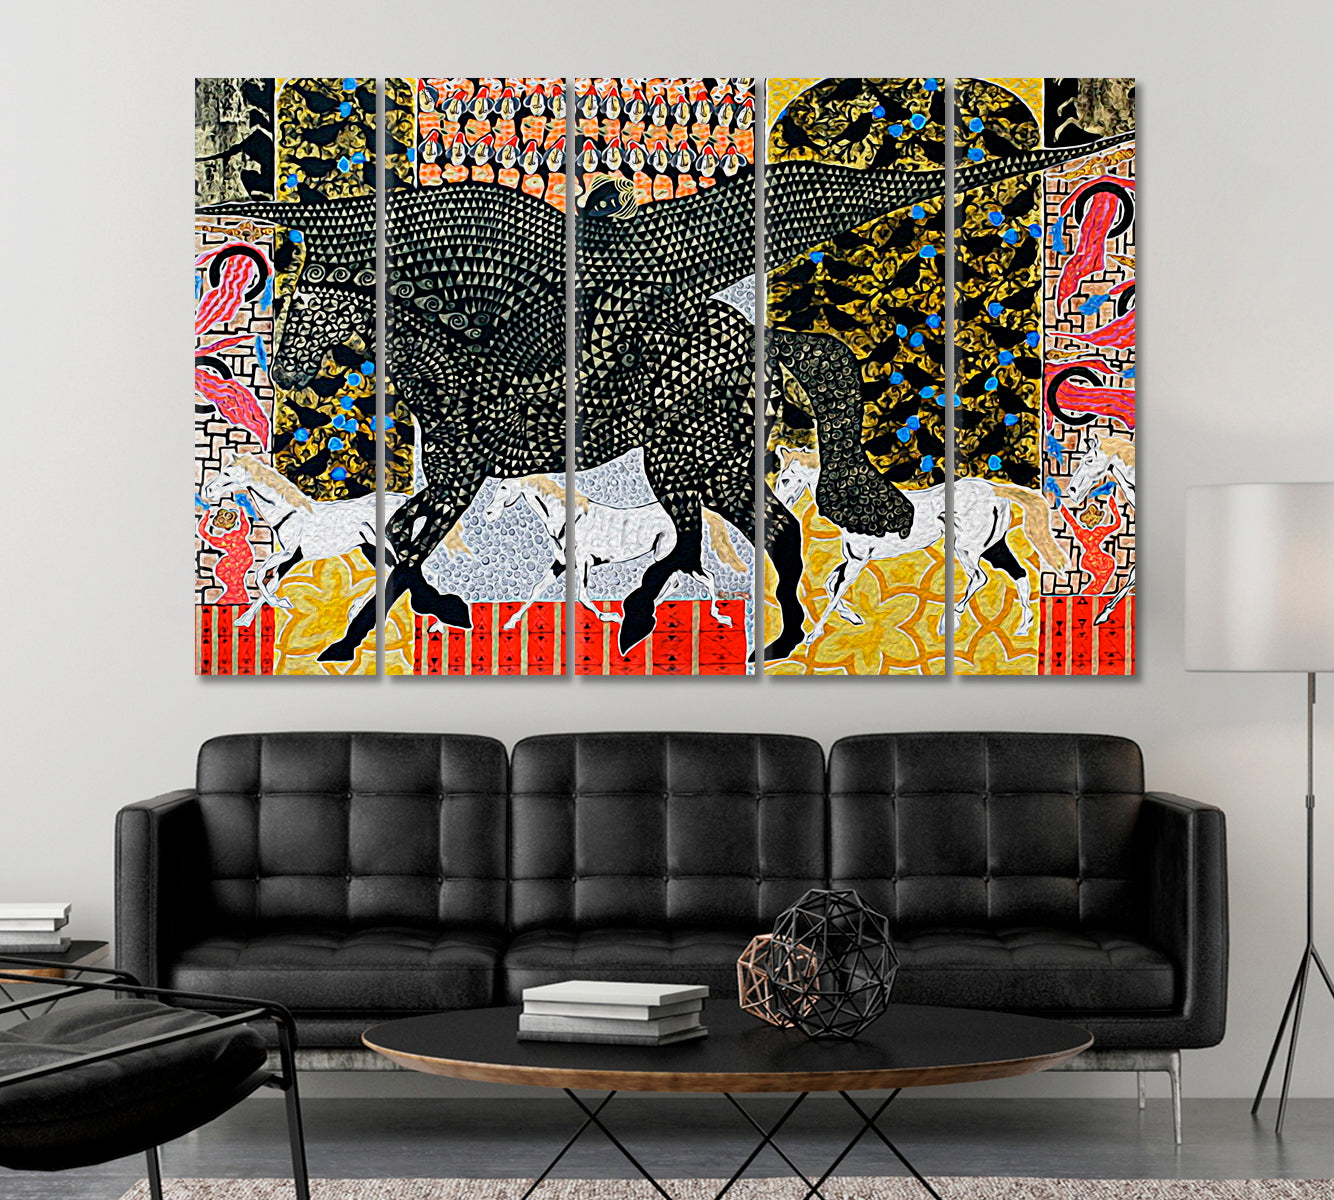 PEGASUS Wings Horse Abstract Geometric Figurative Art Collage Contemporary Art Artesty 5 panels 36" x 24" 